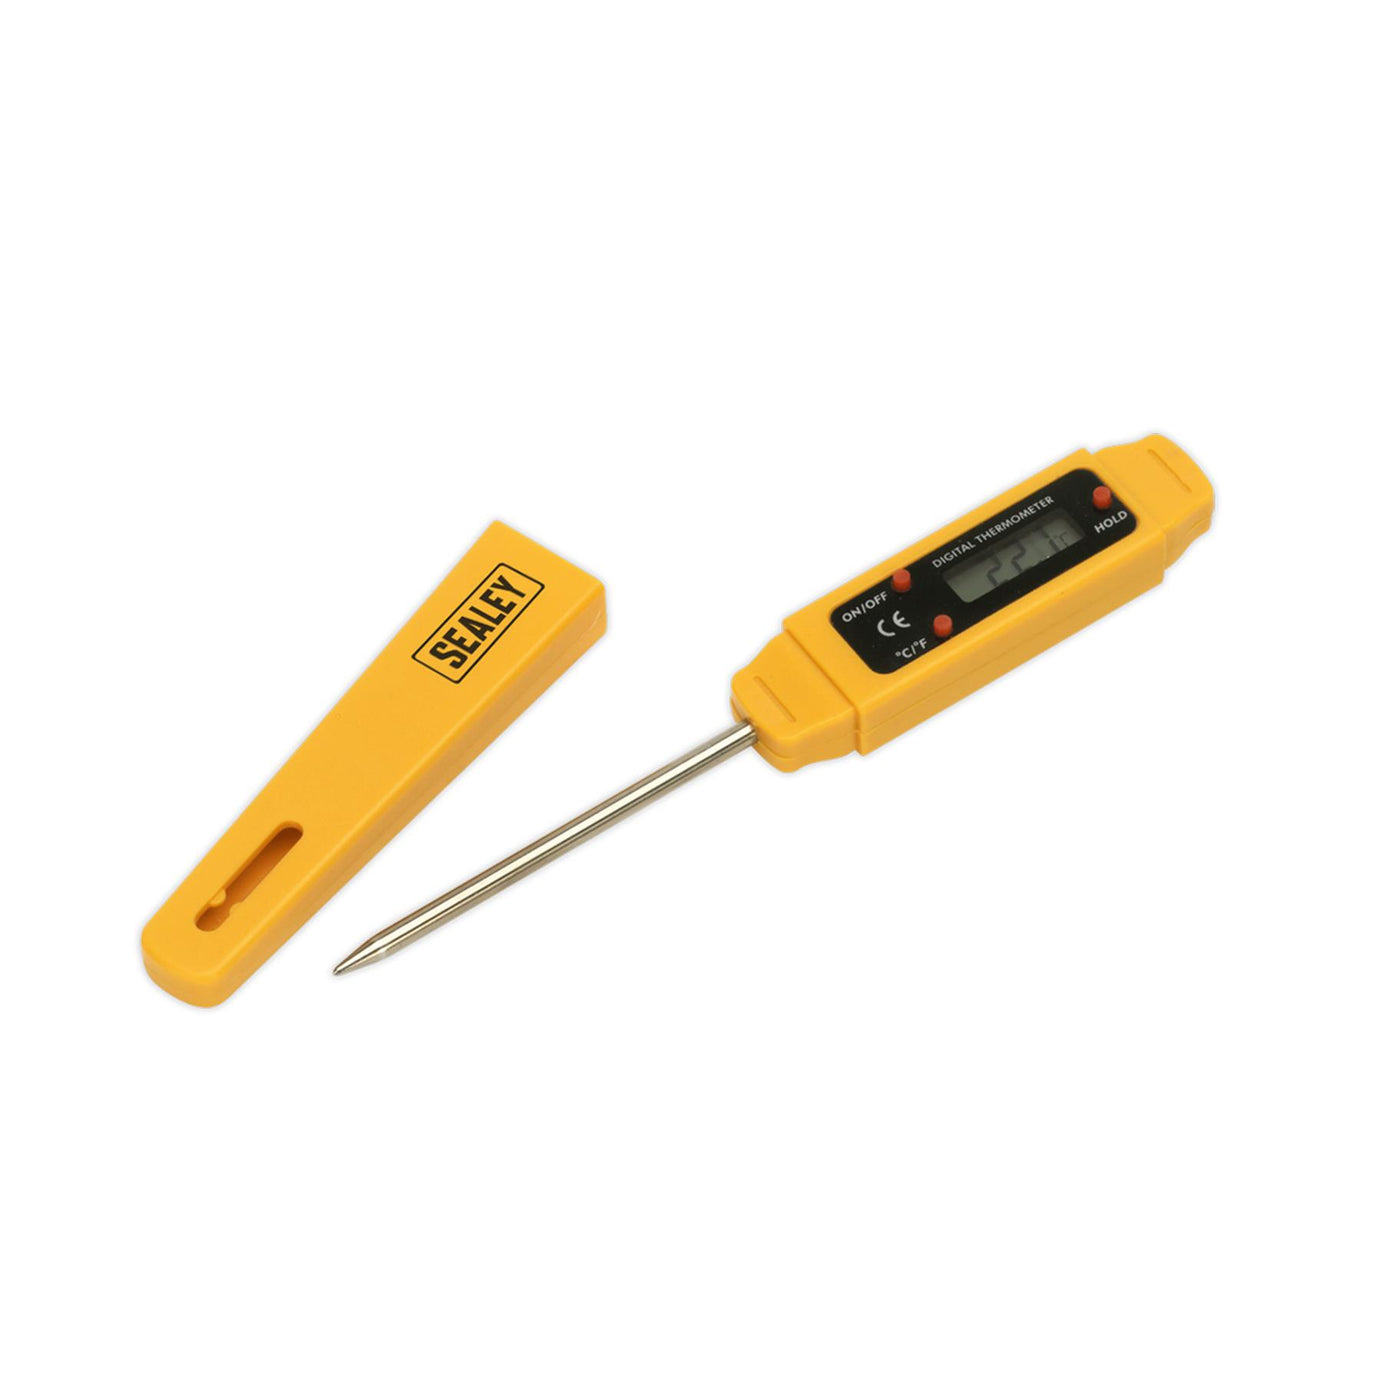 Sealey Mini Digital Thermometer Measuring Both °C and °F